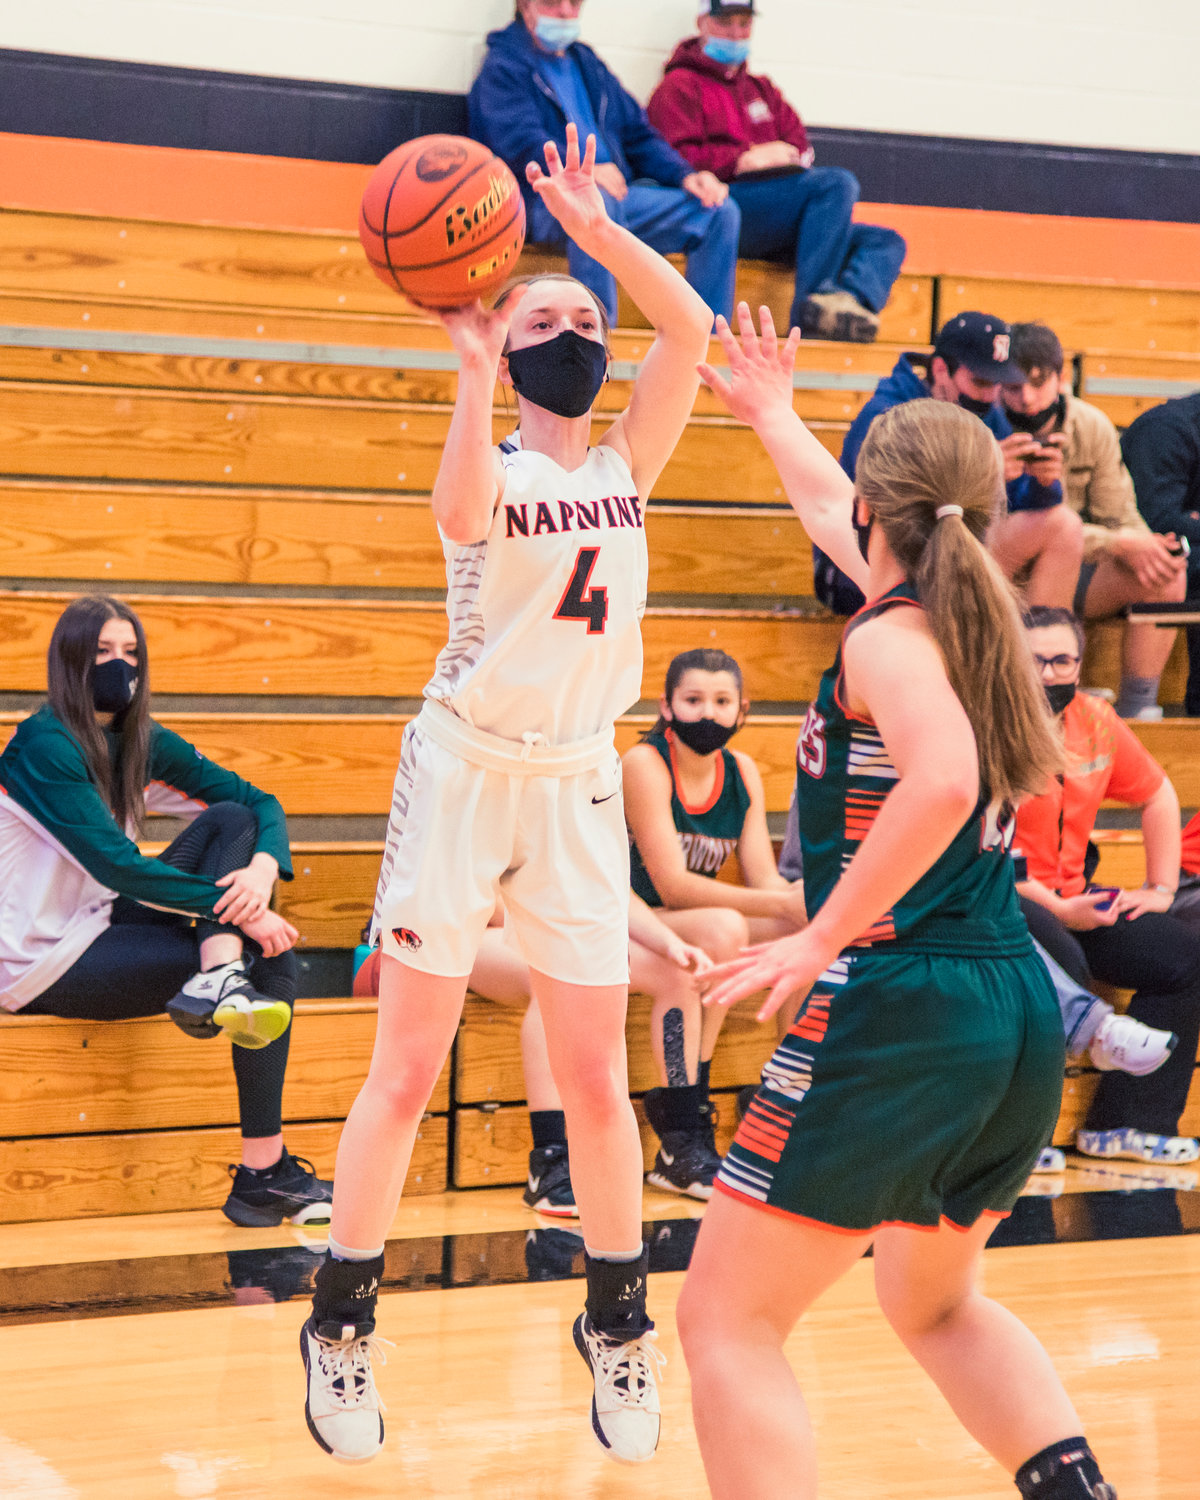 Napavine senior Vannie Fagerness shoots a 3-pointer against MWP on Tuesday.